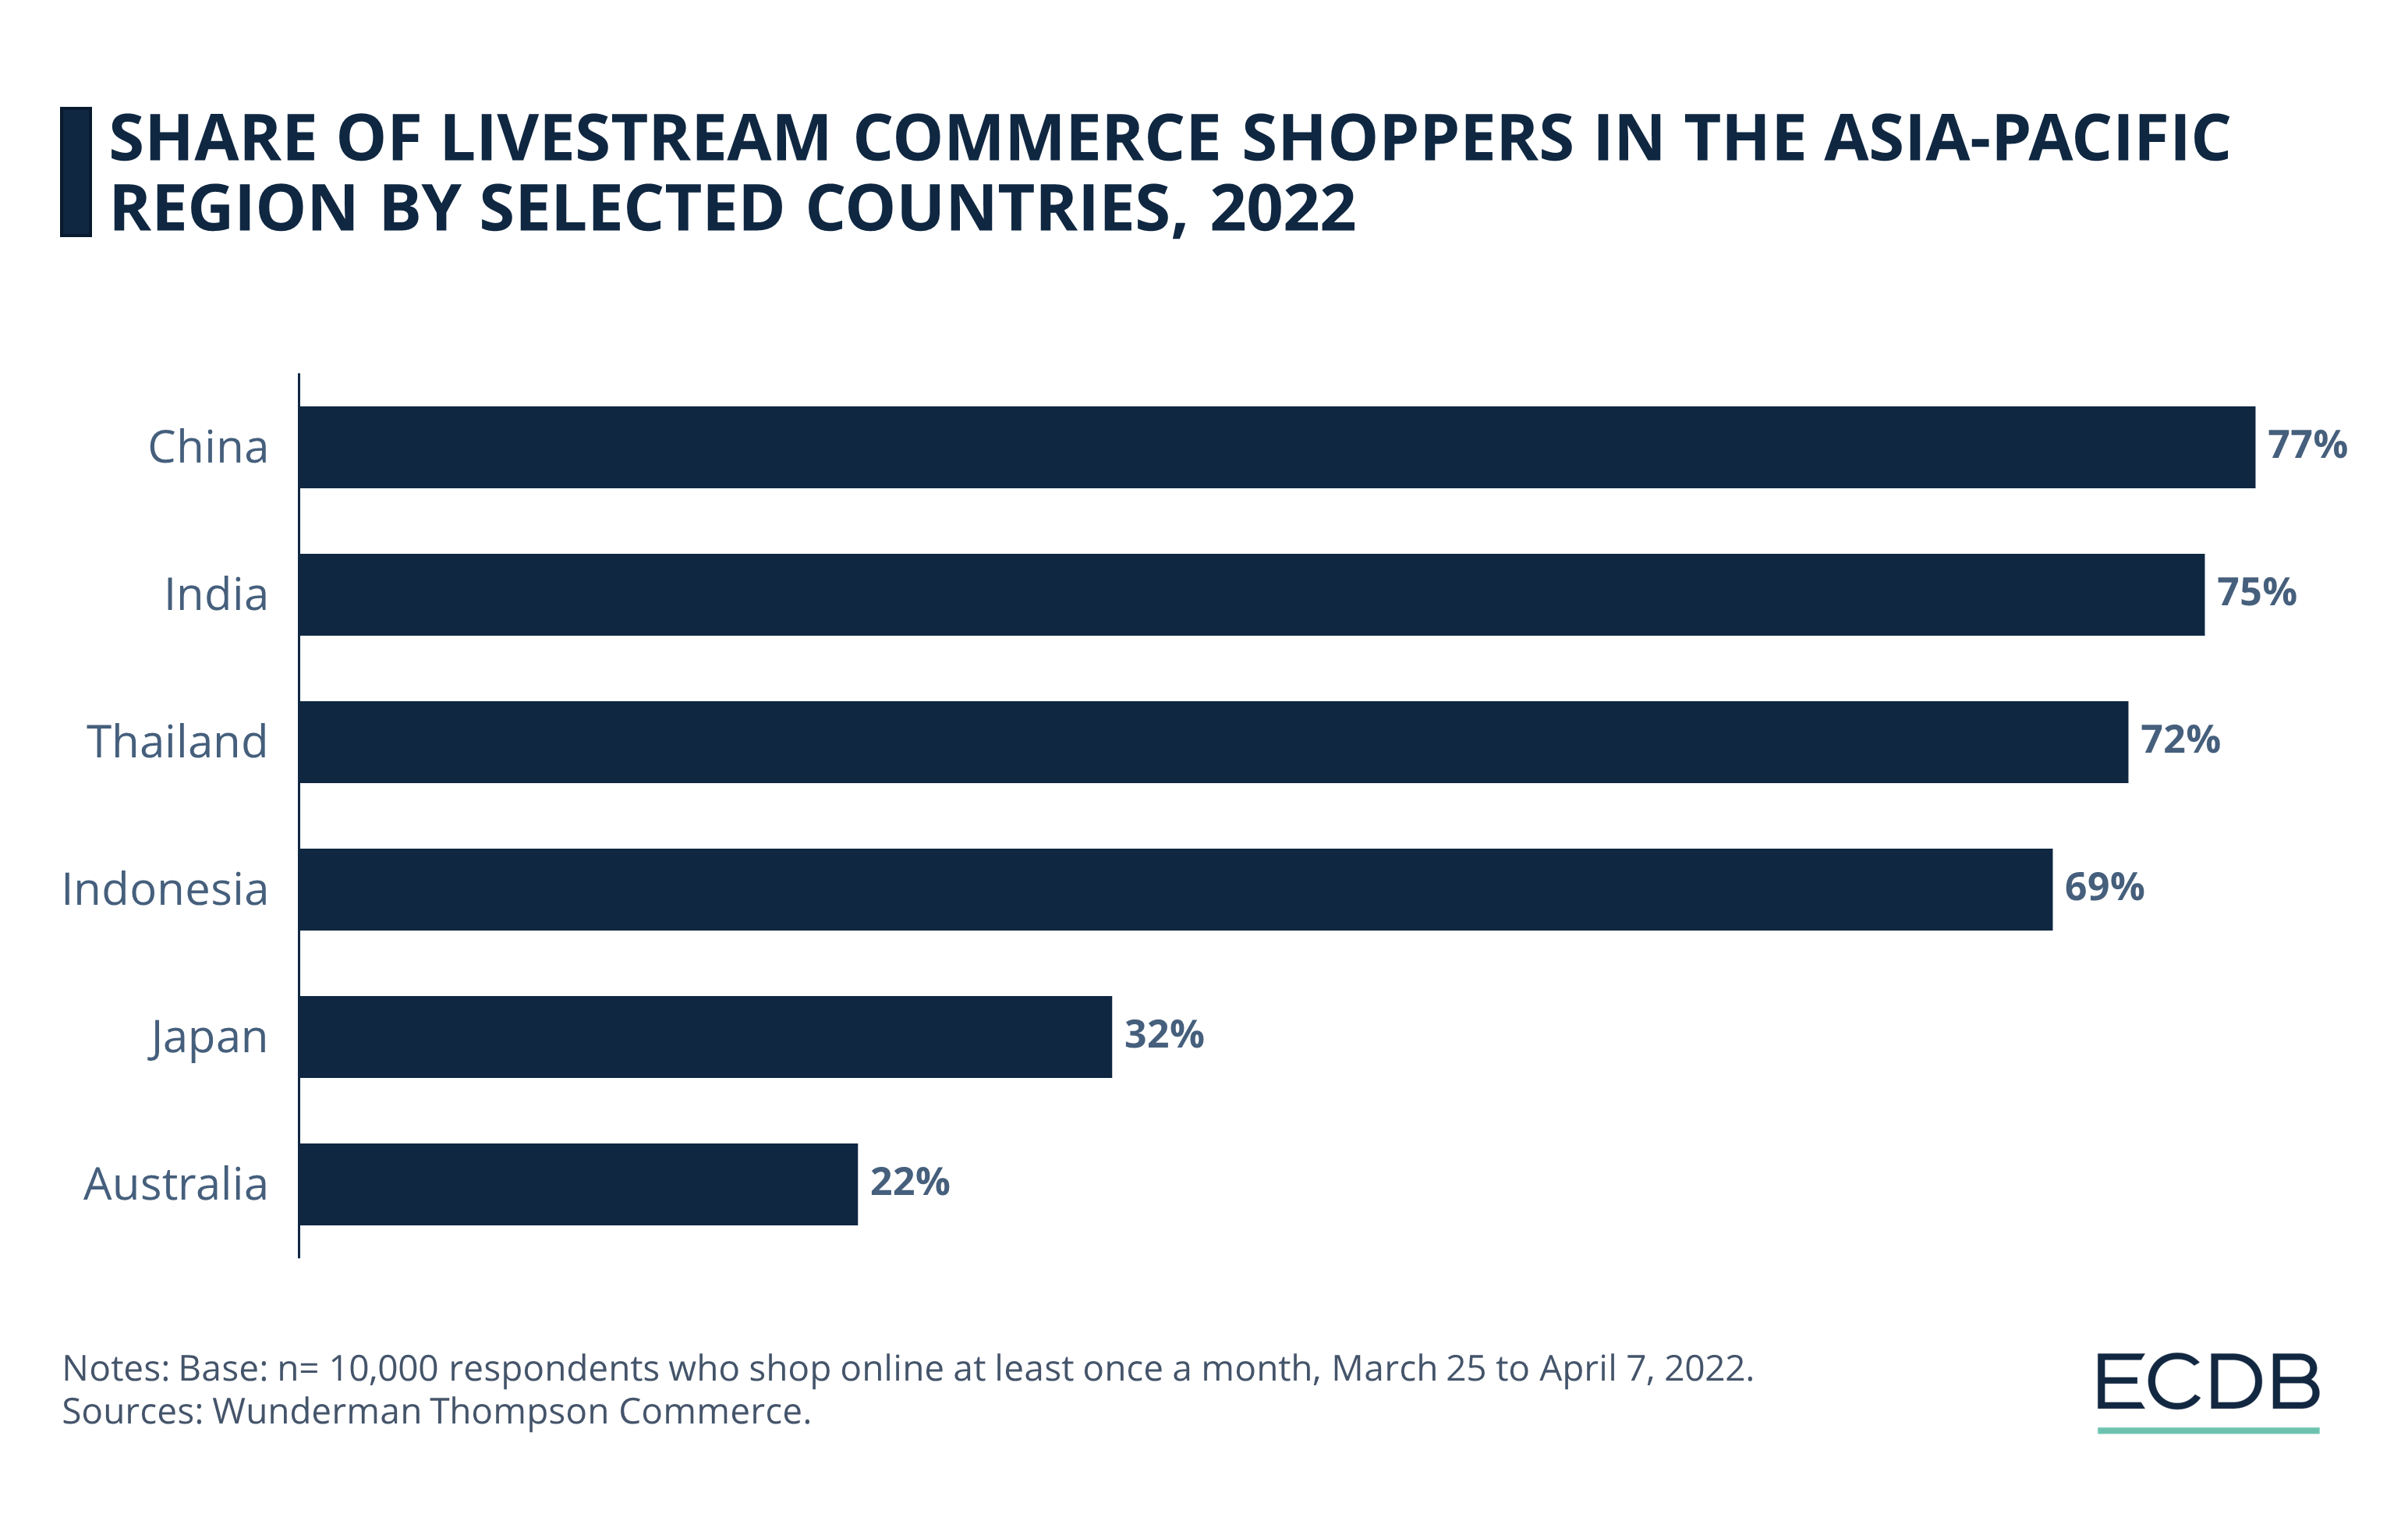 Share of Livestream Commerce Shoppers in the Asia-Pacific Region by Selected Countries, 2022